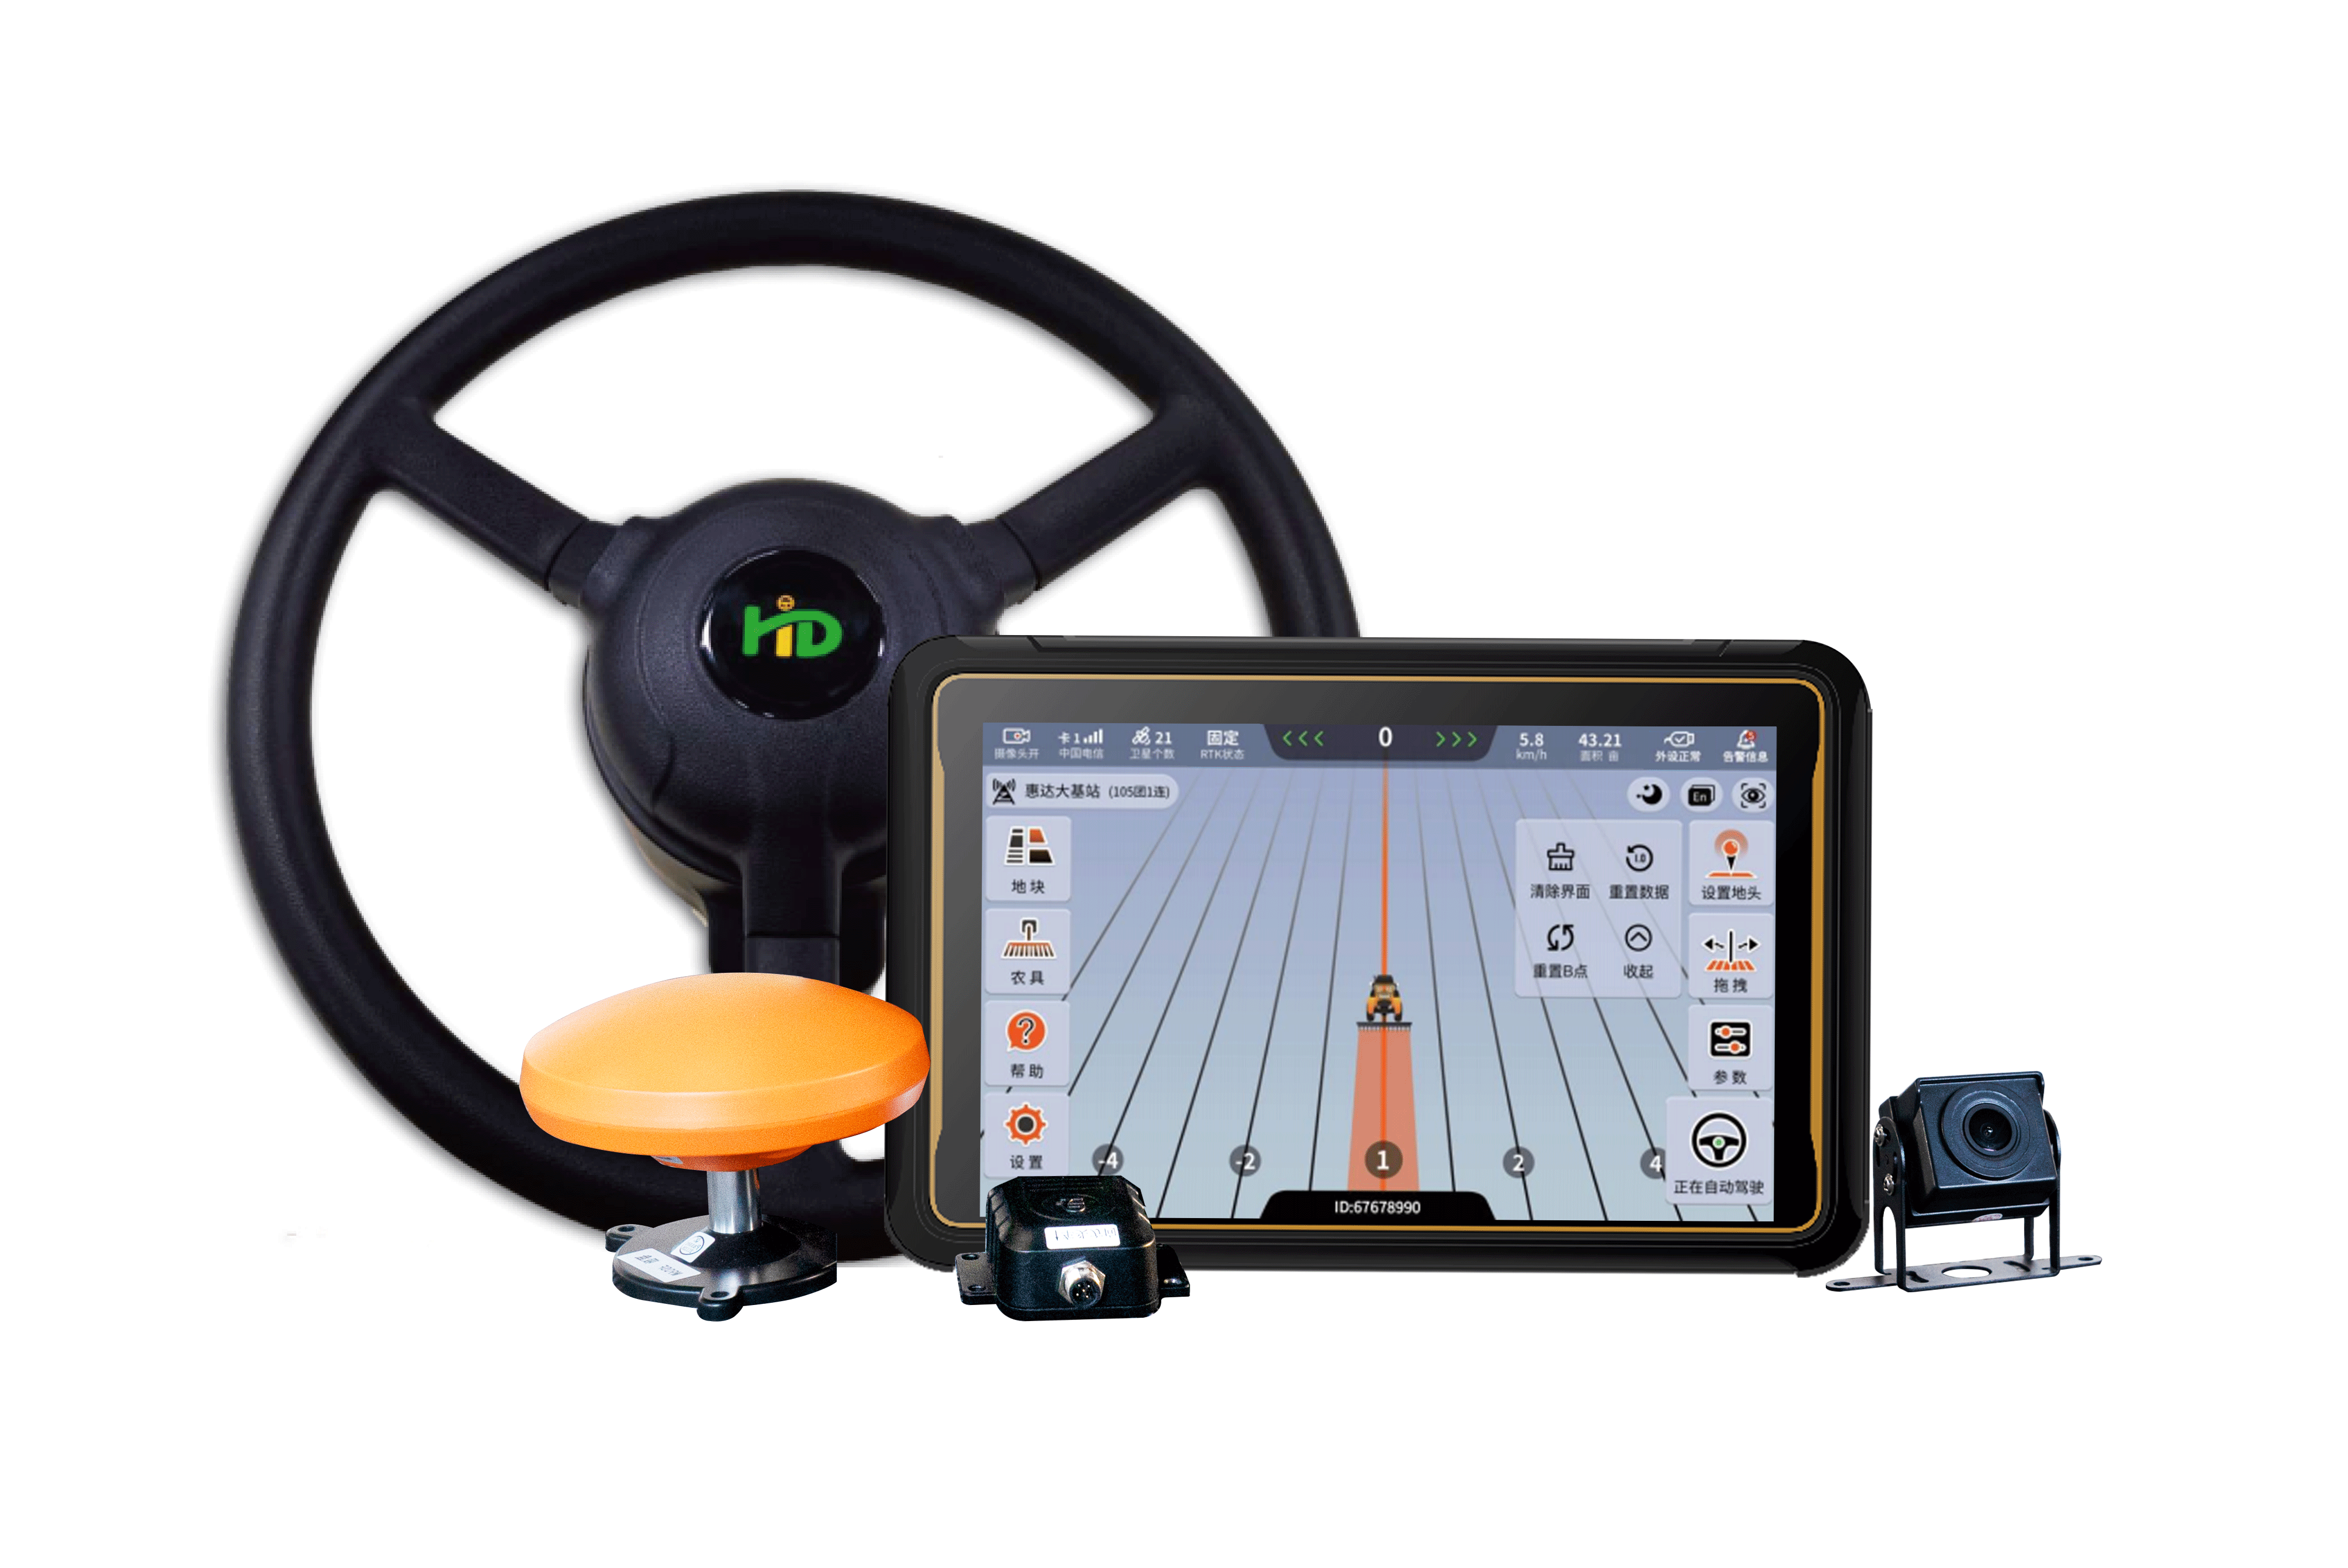 Tractor Autopilot Navigation System Launched: Transforming Agriculture with Self-Driving Combines